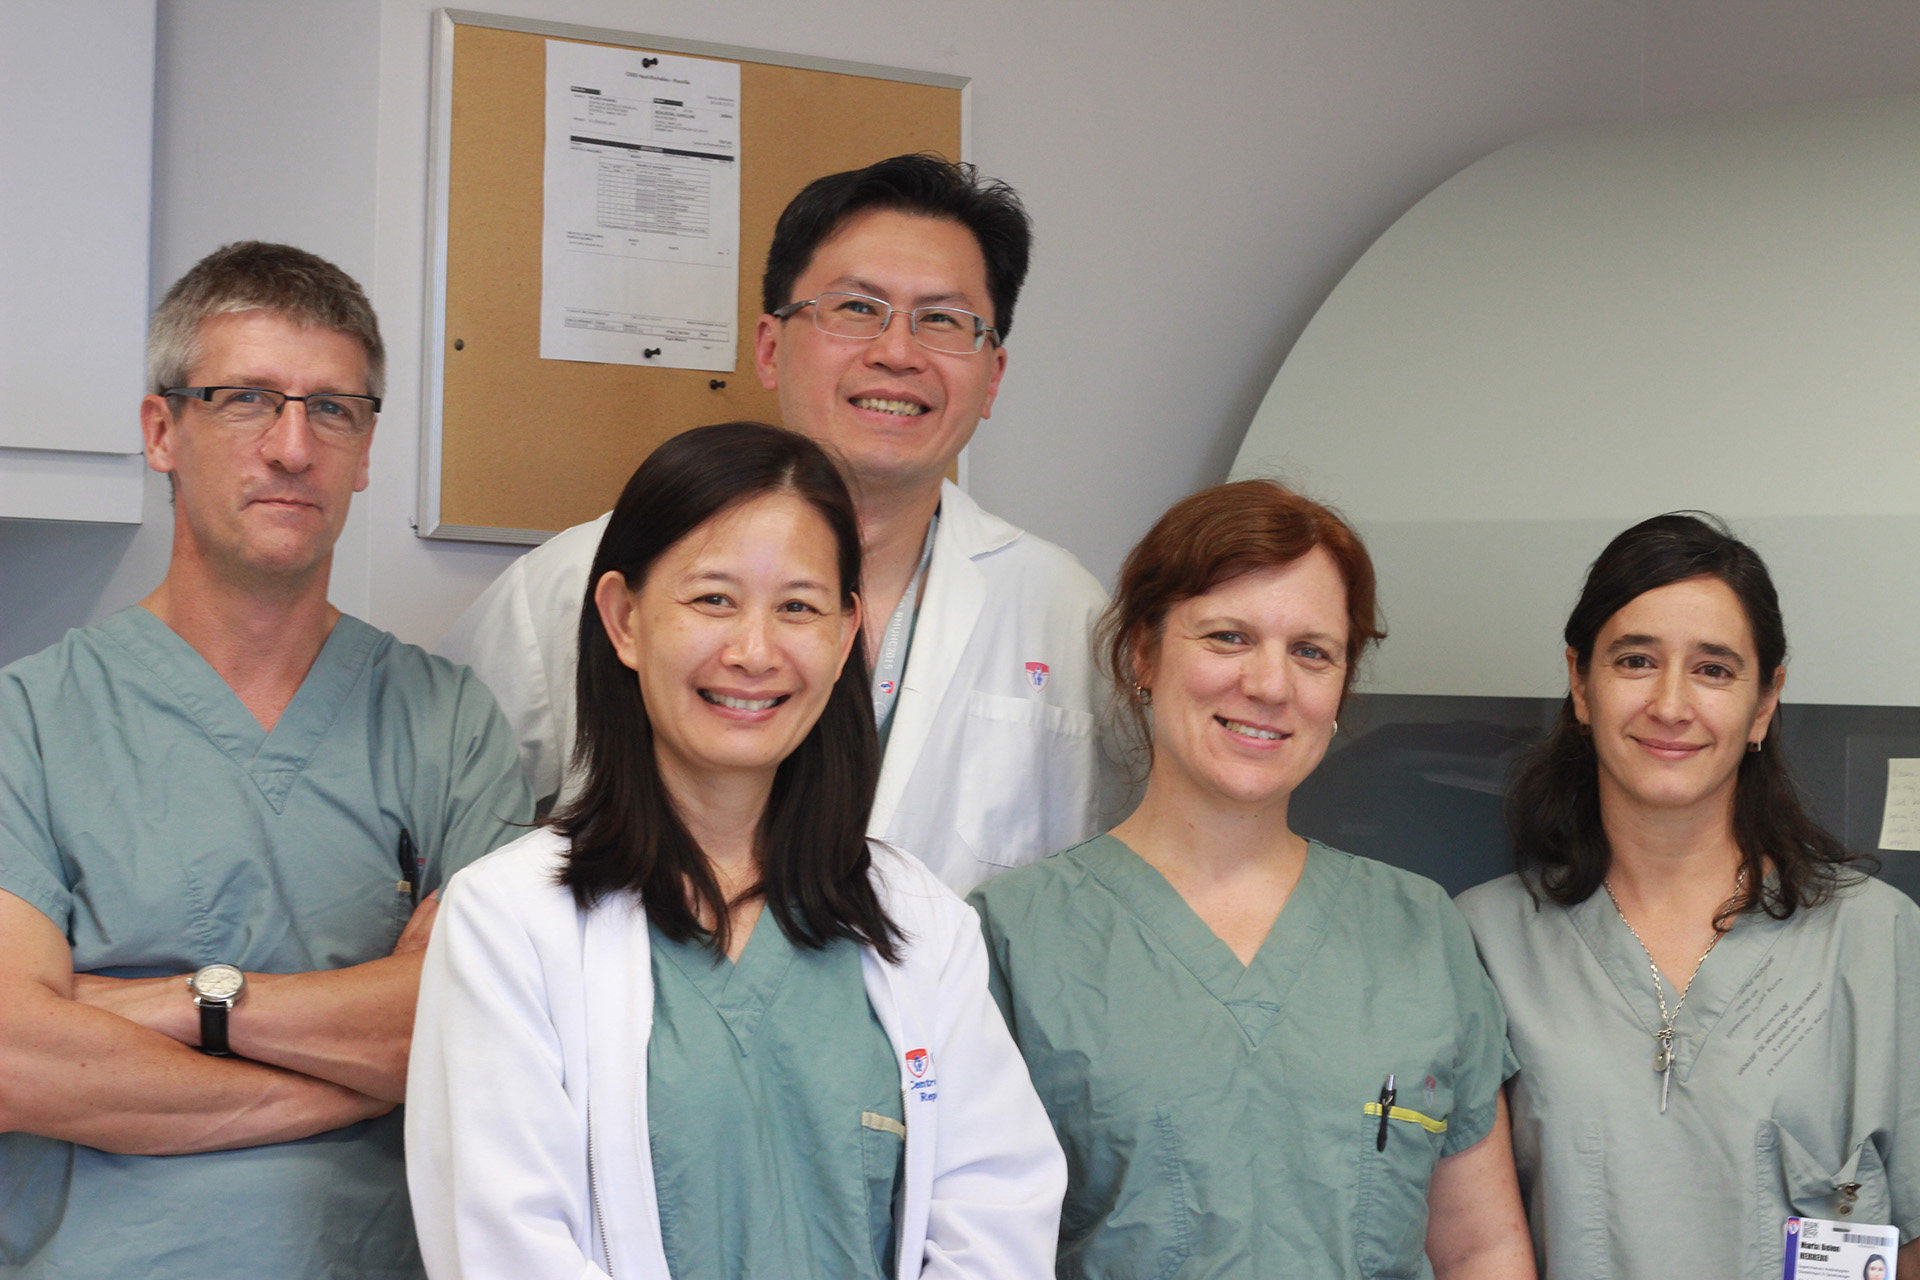 From left to right: Dr. William Buckett, Qing Li, andrologist; Dr. Peter Chan, director of Male Reproductive Medicine, MUHC; Josée Lefebvre, andrologist; and María Belén Herrero, chief andrologist, MUHC Reproductive Centre.